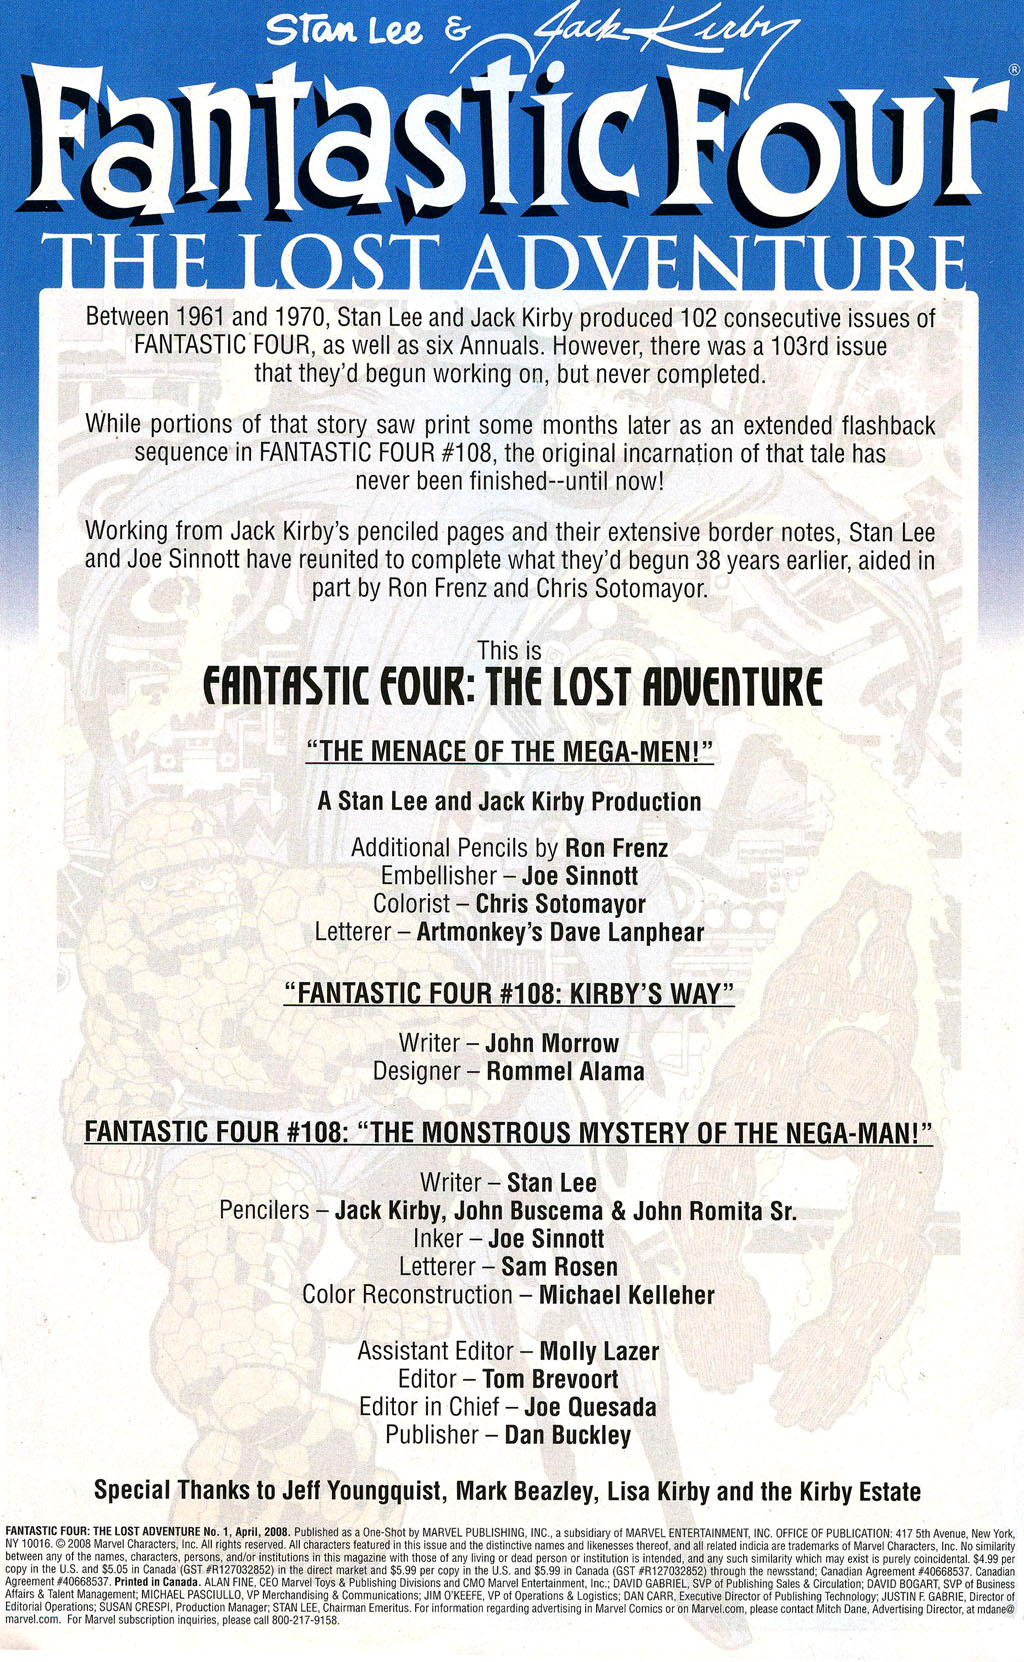 Read online Fantastic Four: The Lost Adventure comic -  Issue # Full - 2